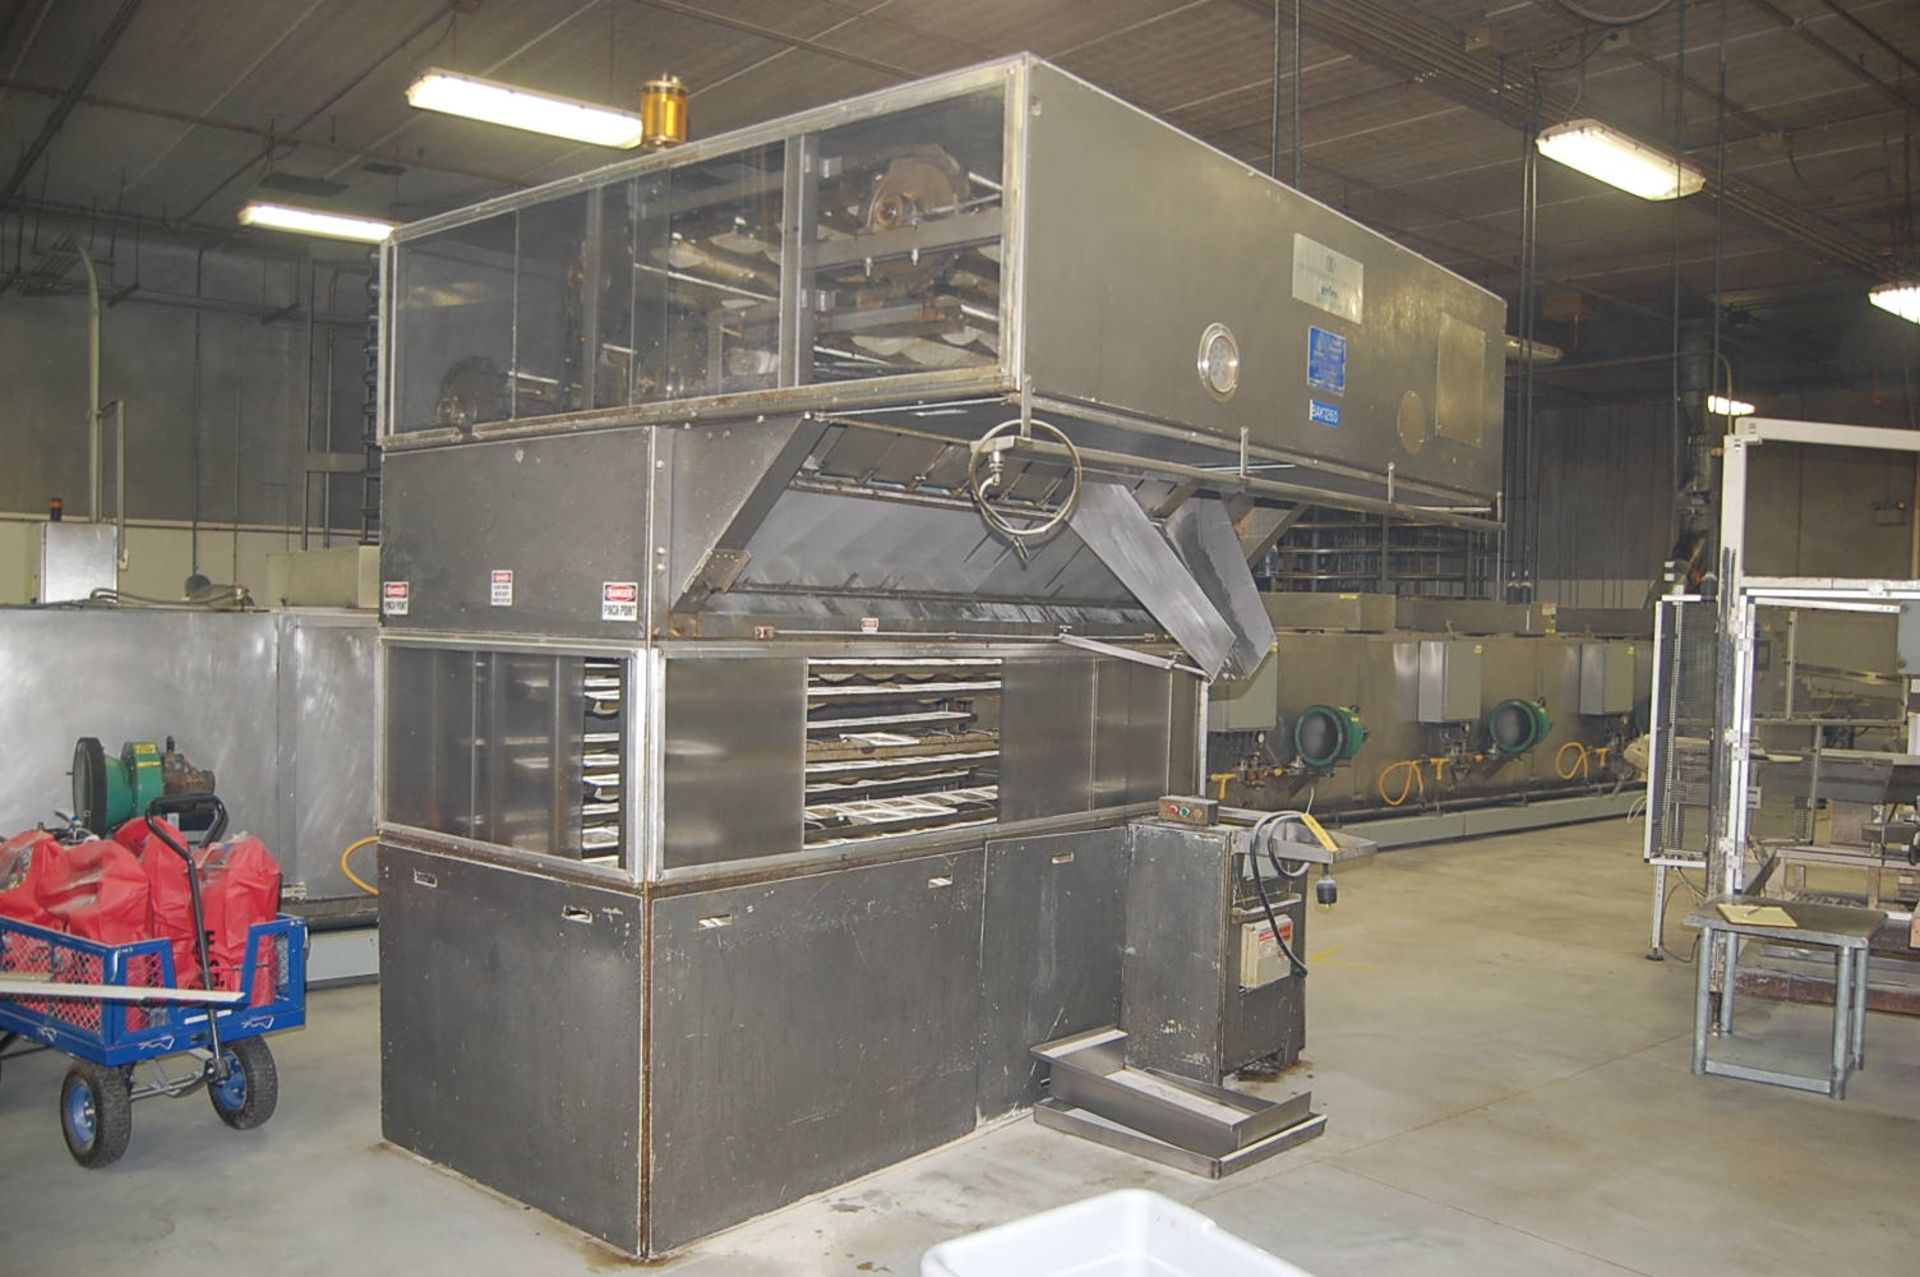 Bauers Equipment Topos Monidial Corp Proofer, Job #3454, 480 Volt, Additional Assorted Trays for - Image 3 of 3